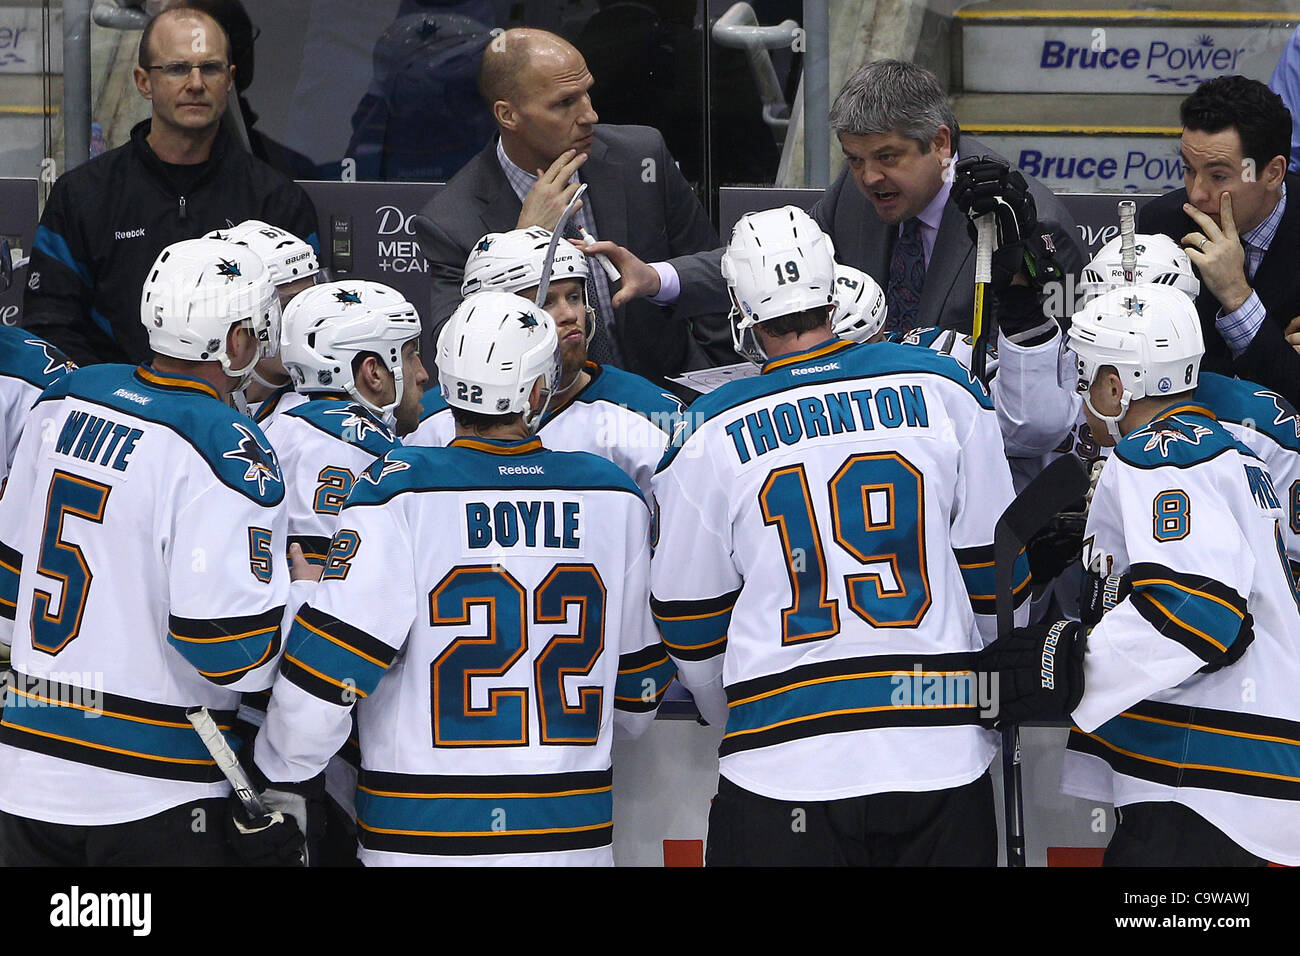 Feb. 23, 2012 - Toronto, Ontario, Canada - San Jose Sharks head coach Todd McLellan discusses strategy with his team during a timeout against the Toronto Maple Leafs in NHL action at the Air Canada Centre in Toronto, Ontario. San Jose defeated Toronto 2-1. (Credit Image: © Jay Gula/Southcreek/ZUMAPR Stock Photo